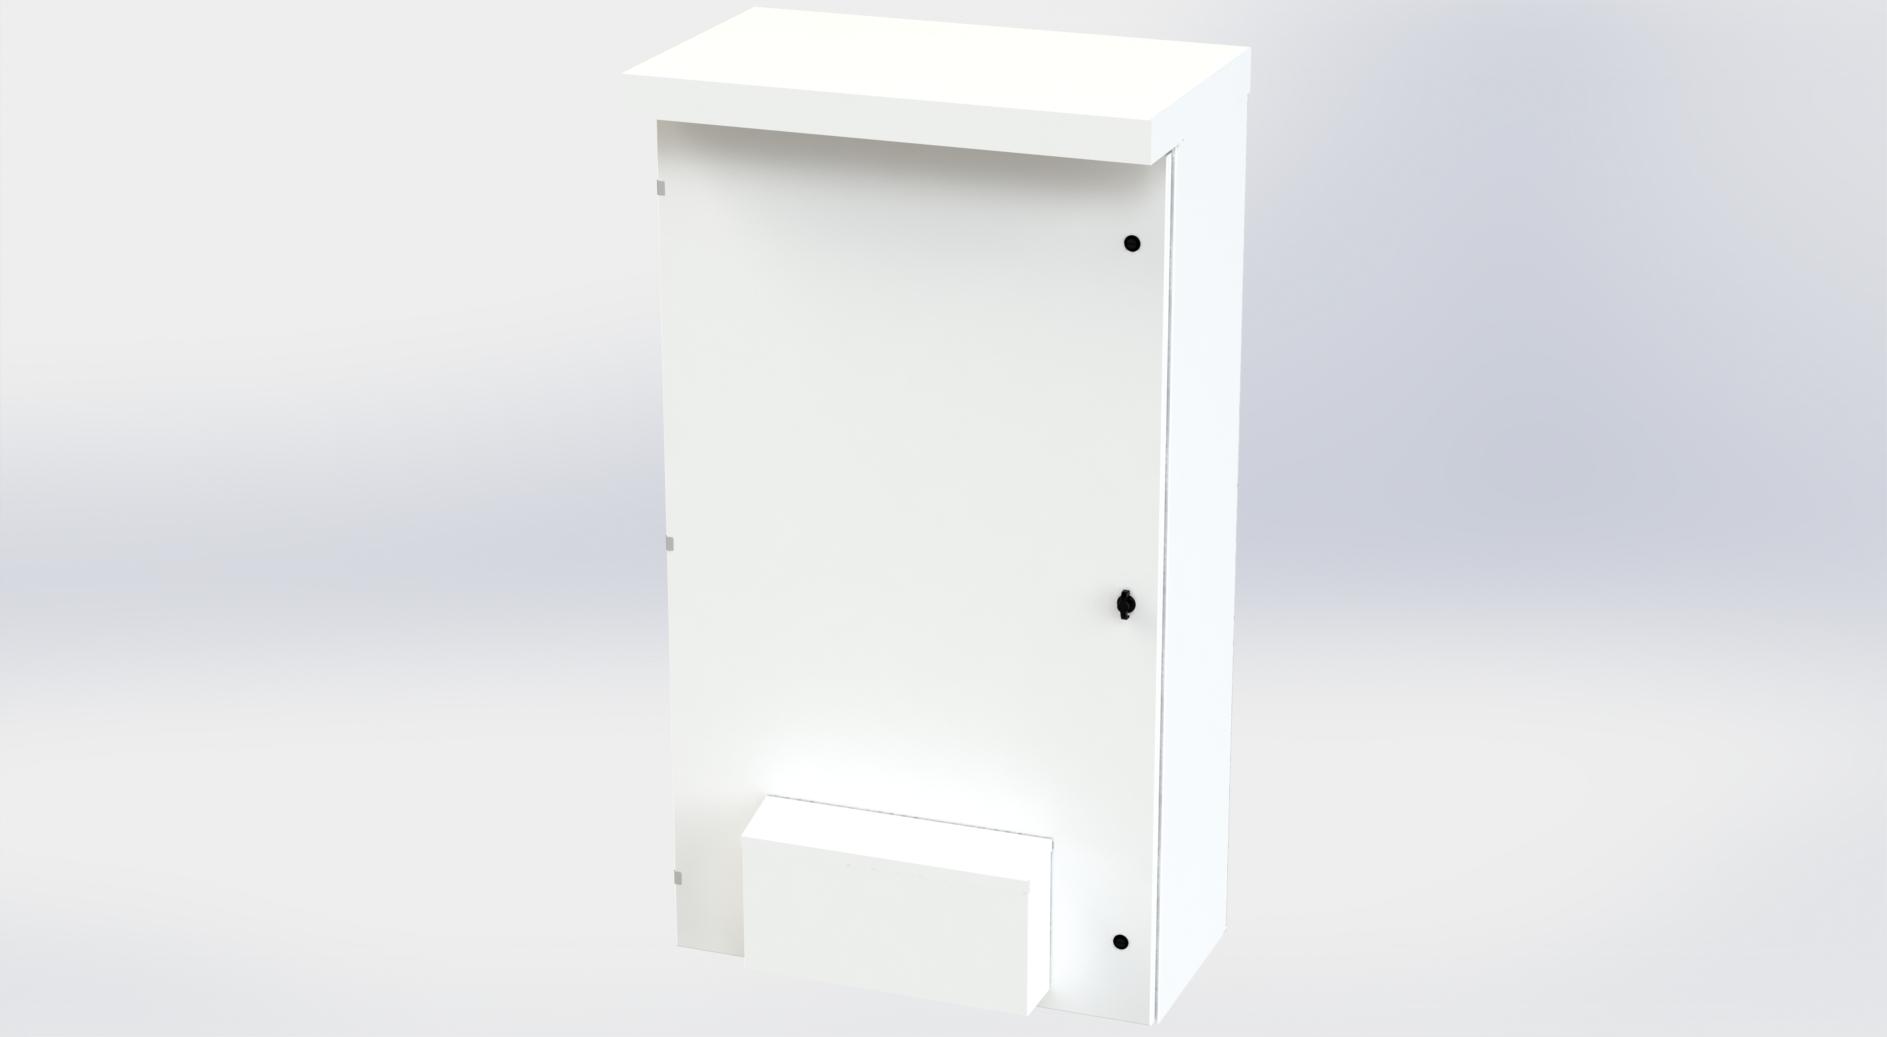 Saginaw Control SCE-65VR3616 Enclosure, Vented Type 3R, Height:65.00", Width:36.00", Depth:16.00", White powder coating inside and out. Optional sub-panels are powder coated white.